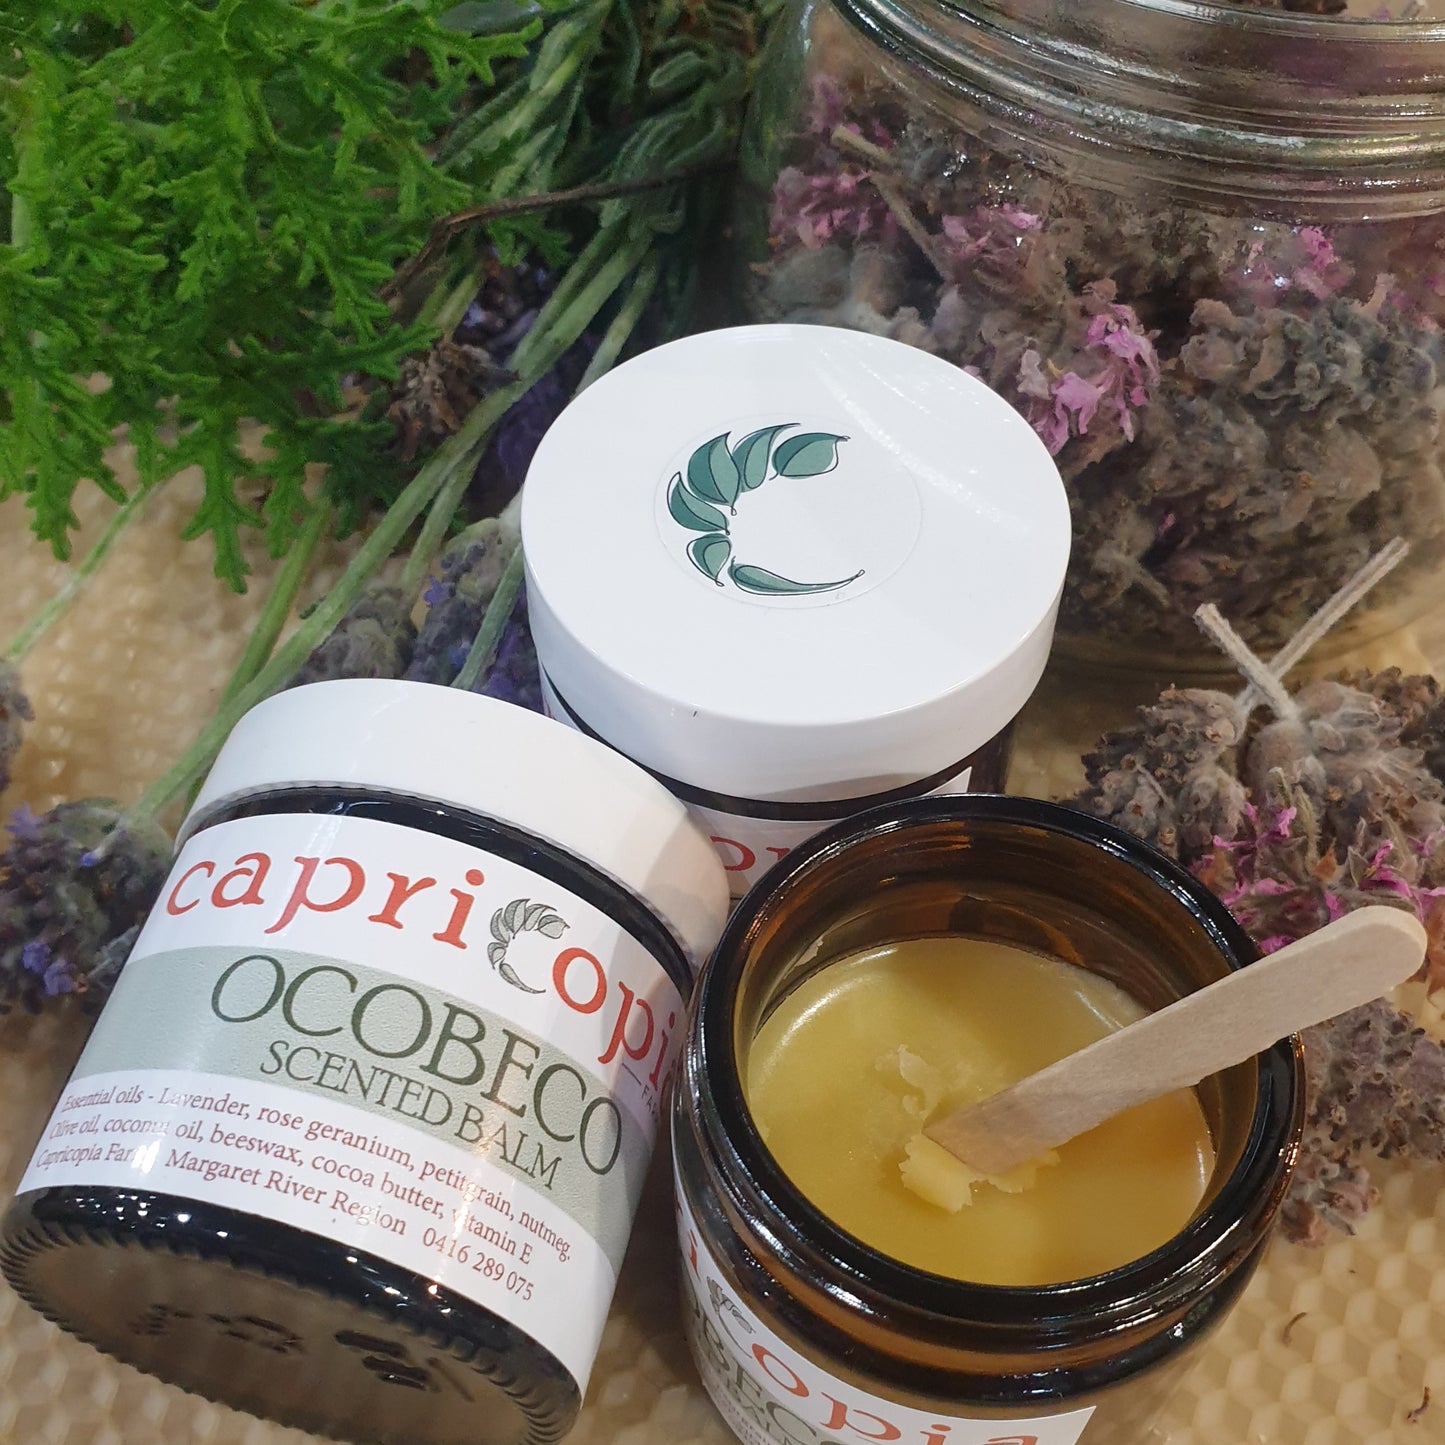 lavender rose geranium oilve oil and beeswax balm